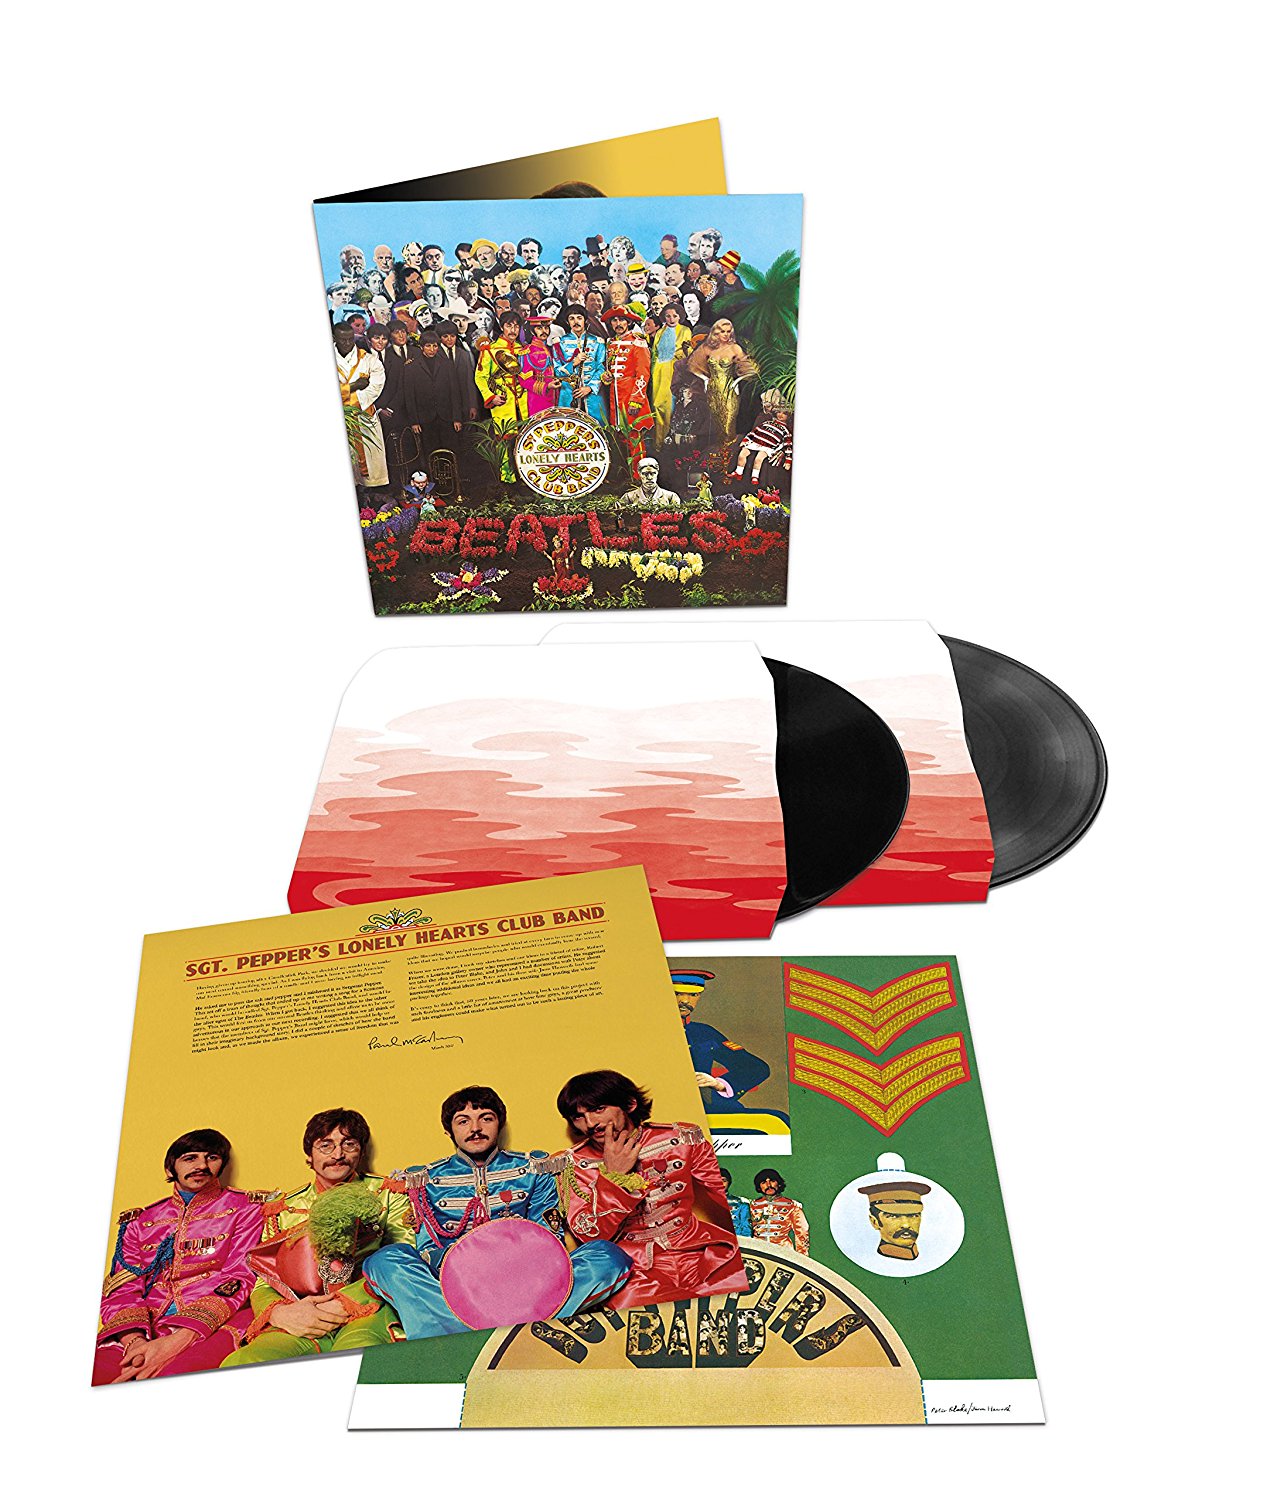 The Beatles / Sgt. Pepper's Lonely Hearts Club Band super deluxe